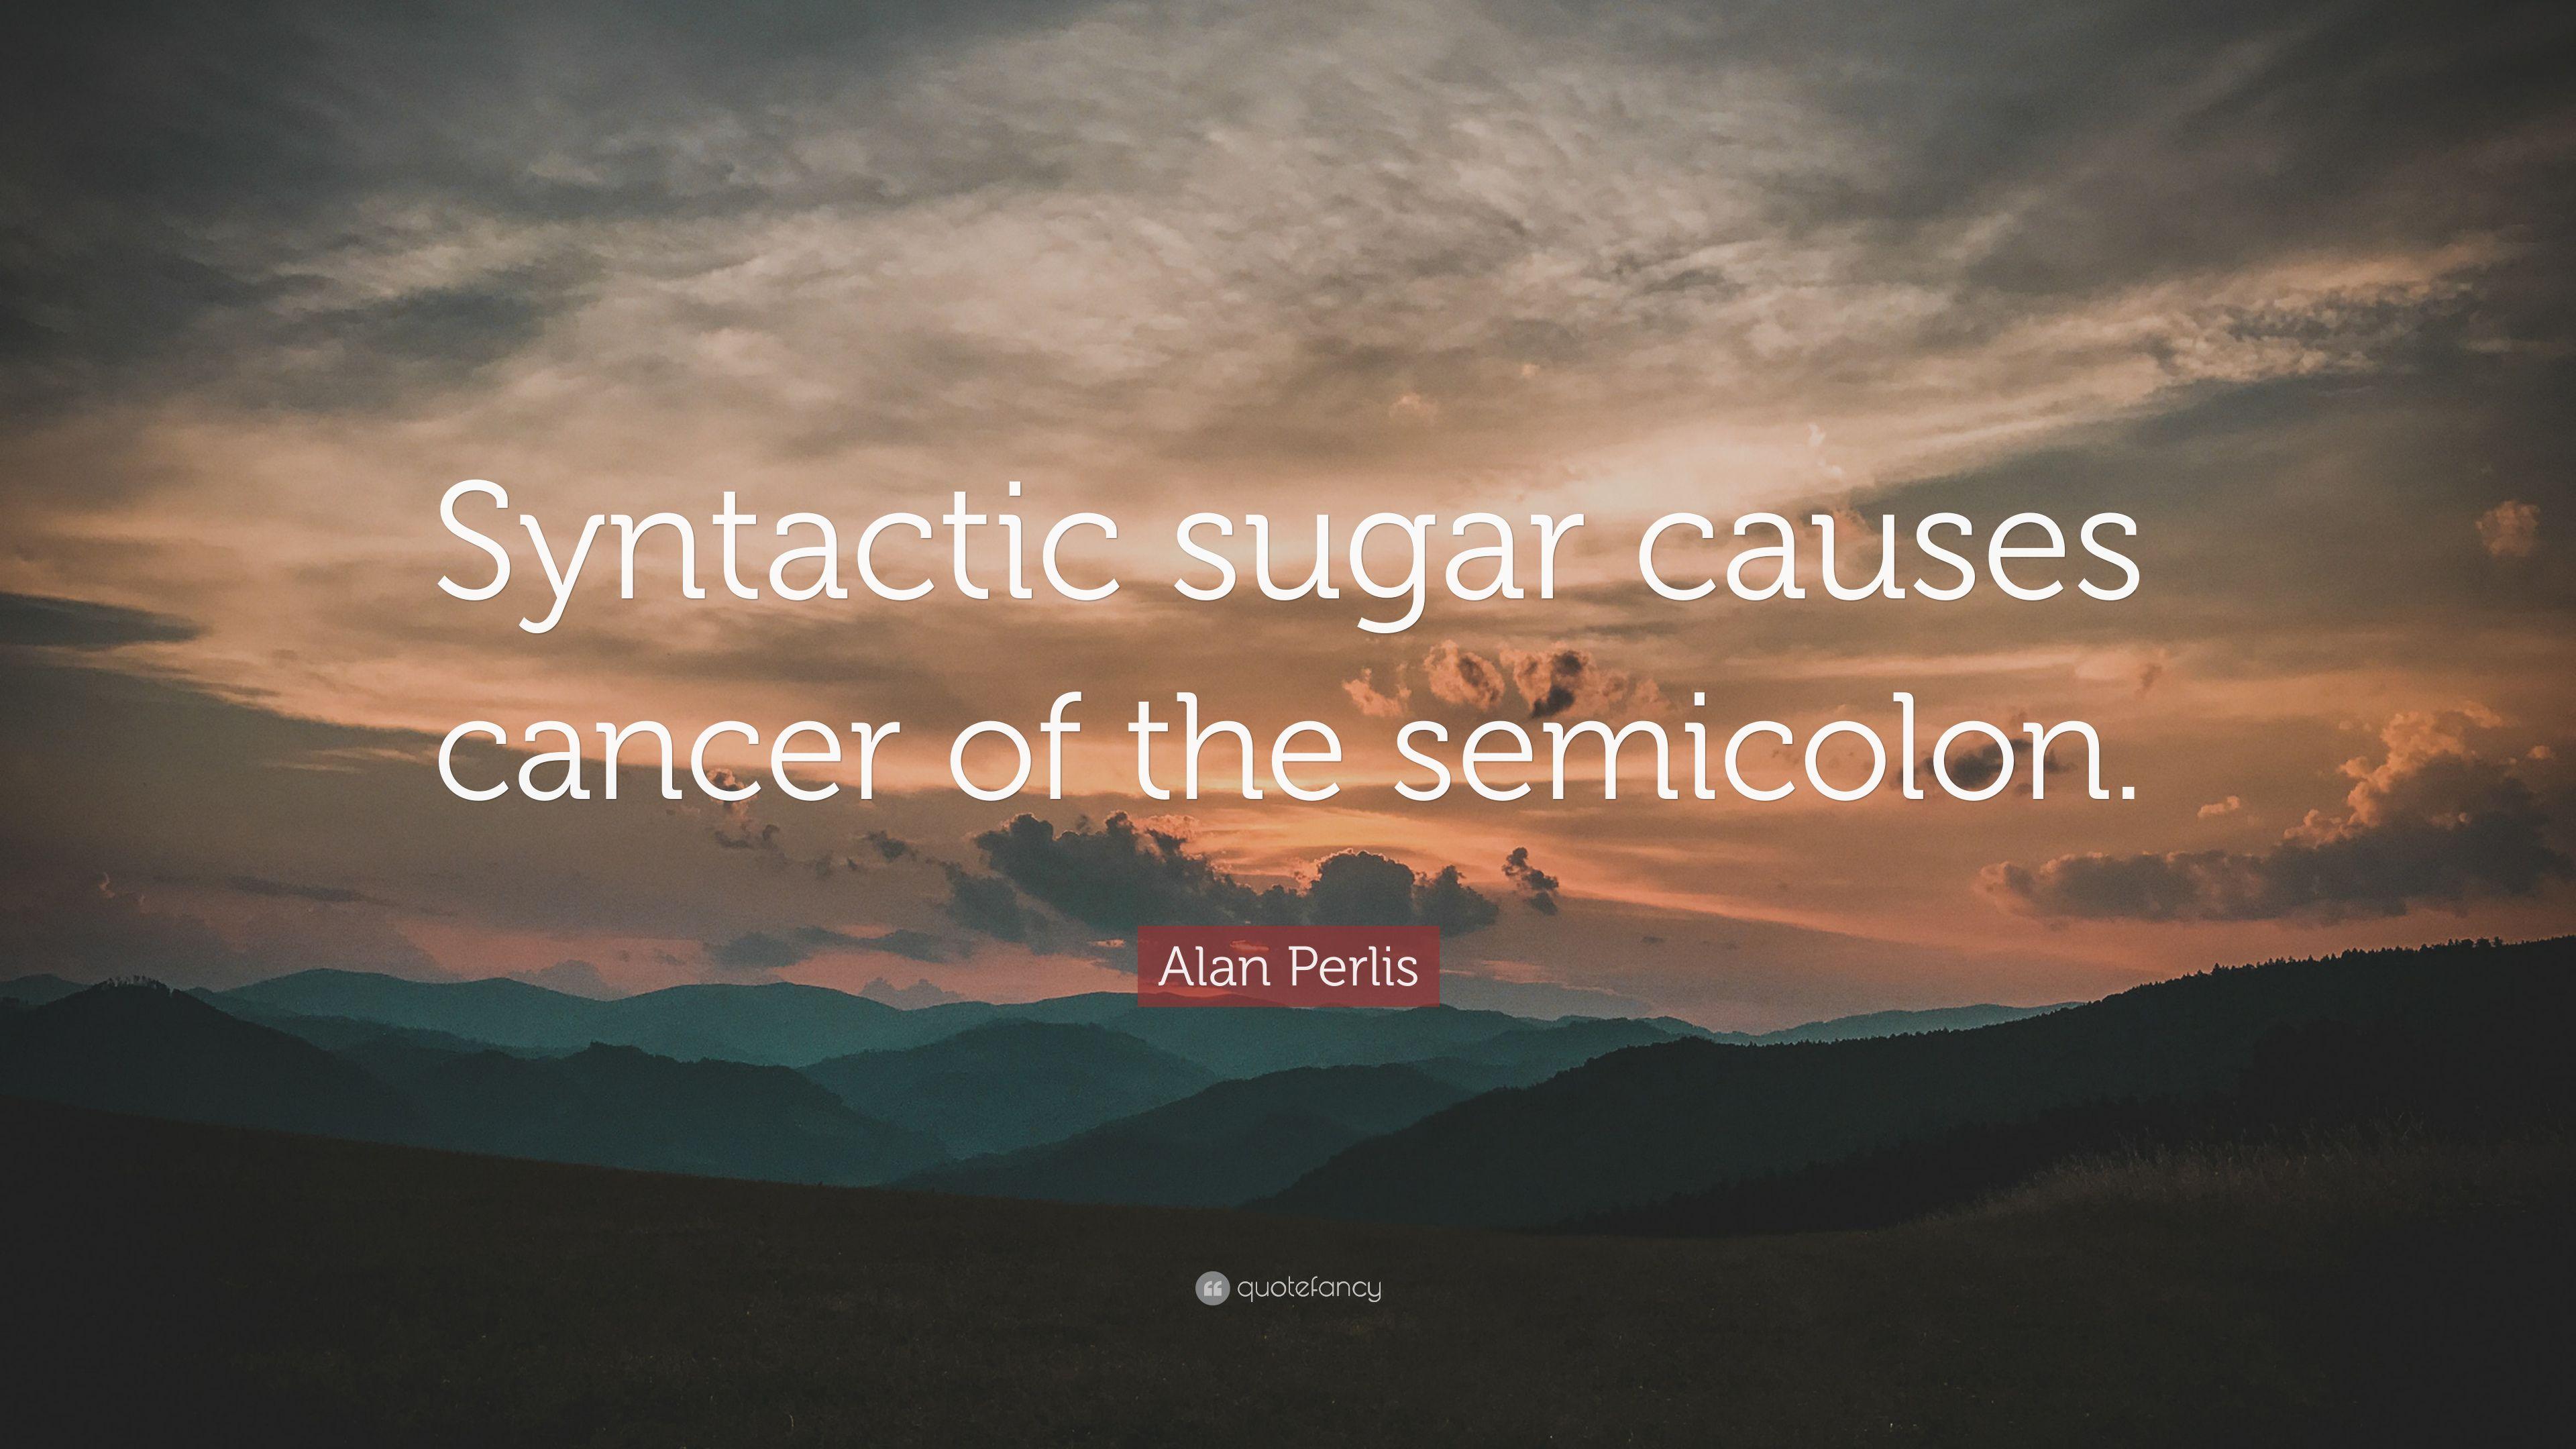 Alan Perlis Quote: “Syntactic sugar causes cancer of the semicolon